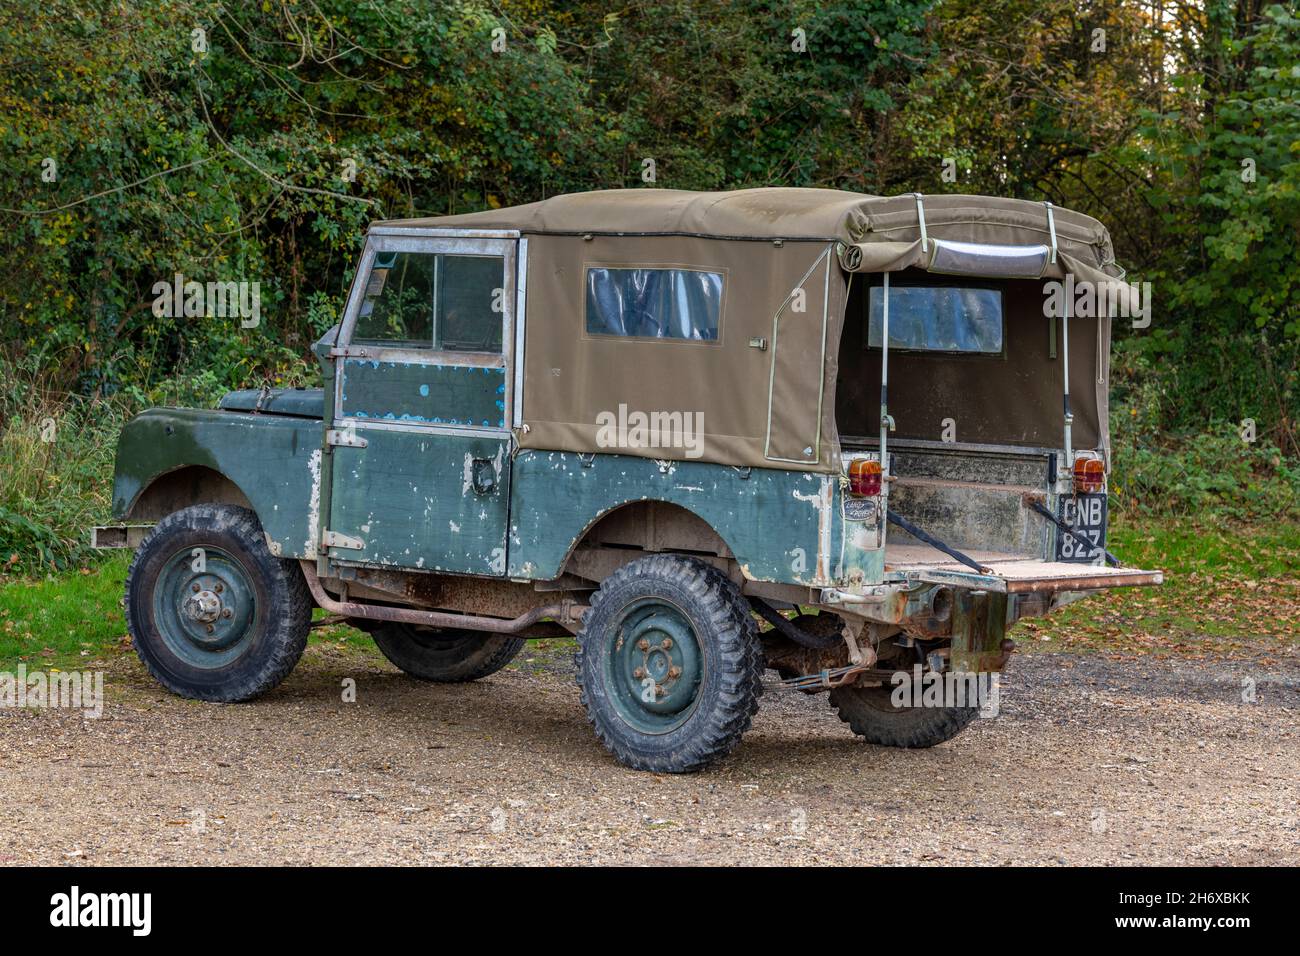 component dodelijk radicaal original heritage series 1 landrover defender with canvas back, heritage  motor vehicle land rover pick up truck, series 1 landrover in original  colour Stock Photo - Alamy